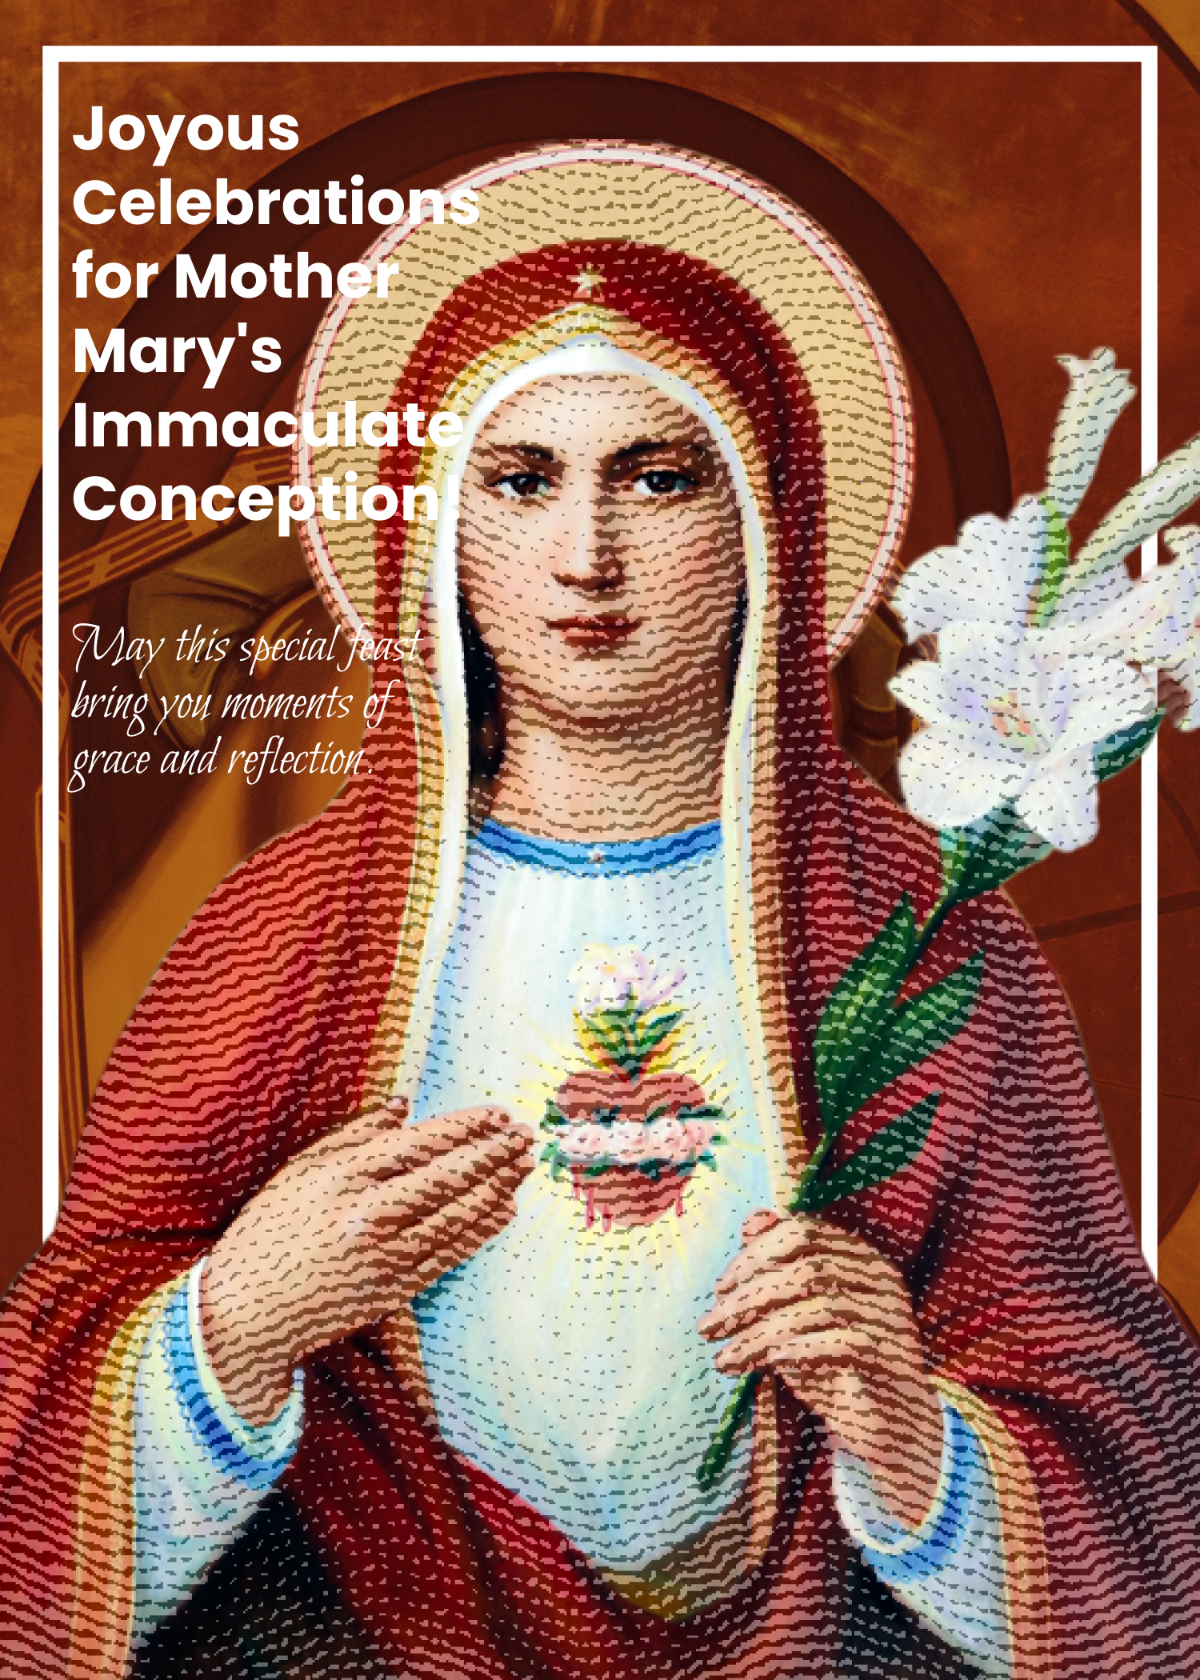 Free Mother Mary Immaculate Conception Feast Wishes Template